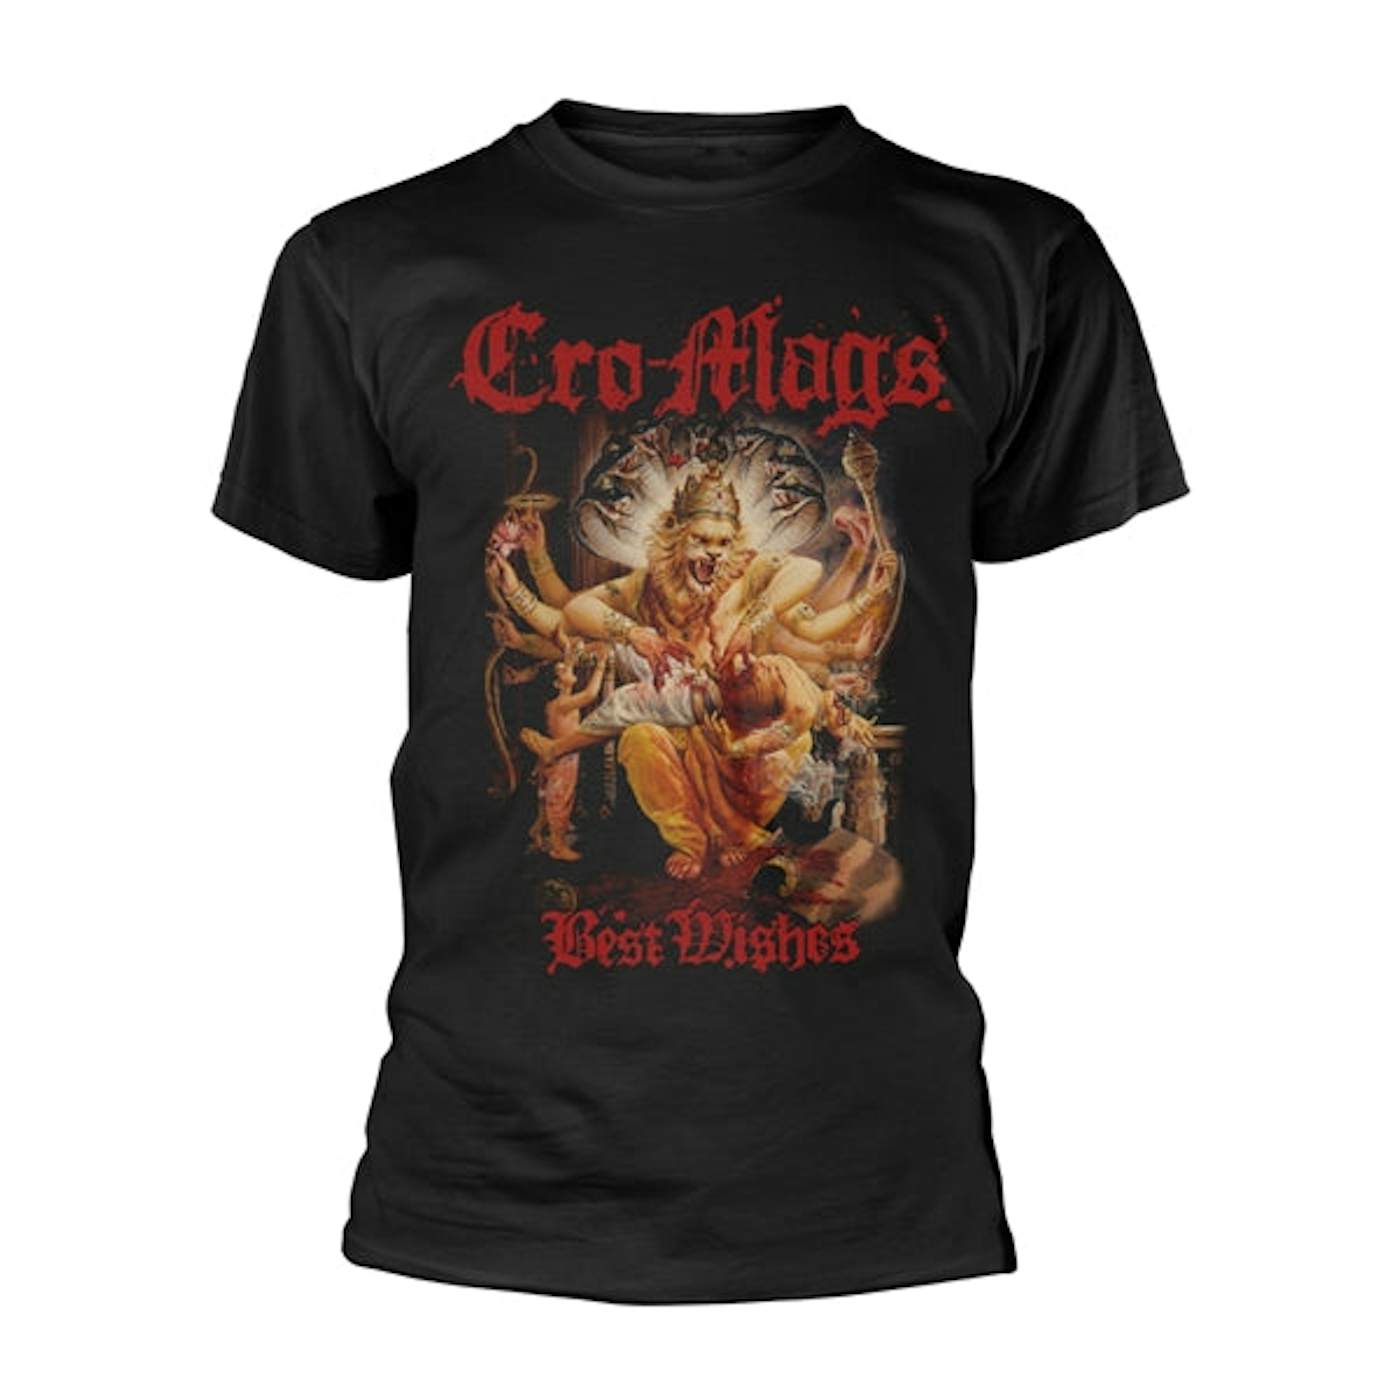 Cro-Mags T-Shirt - Best Wishes